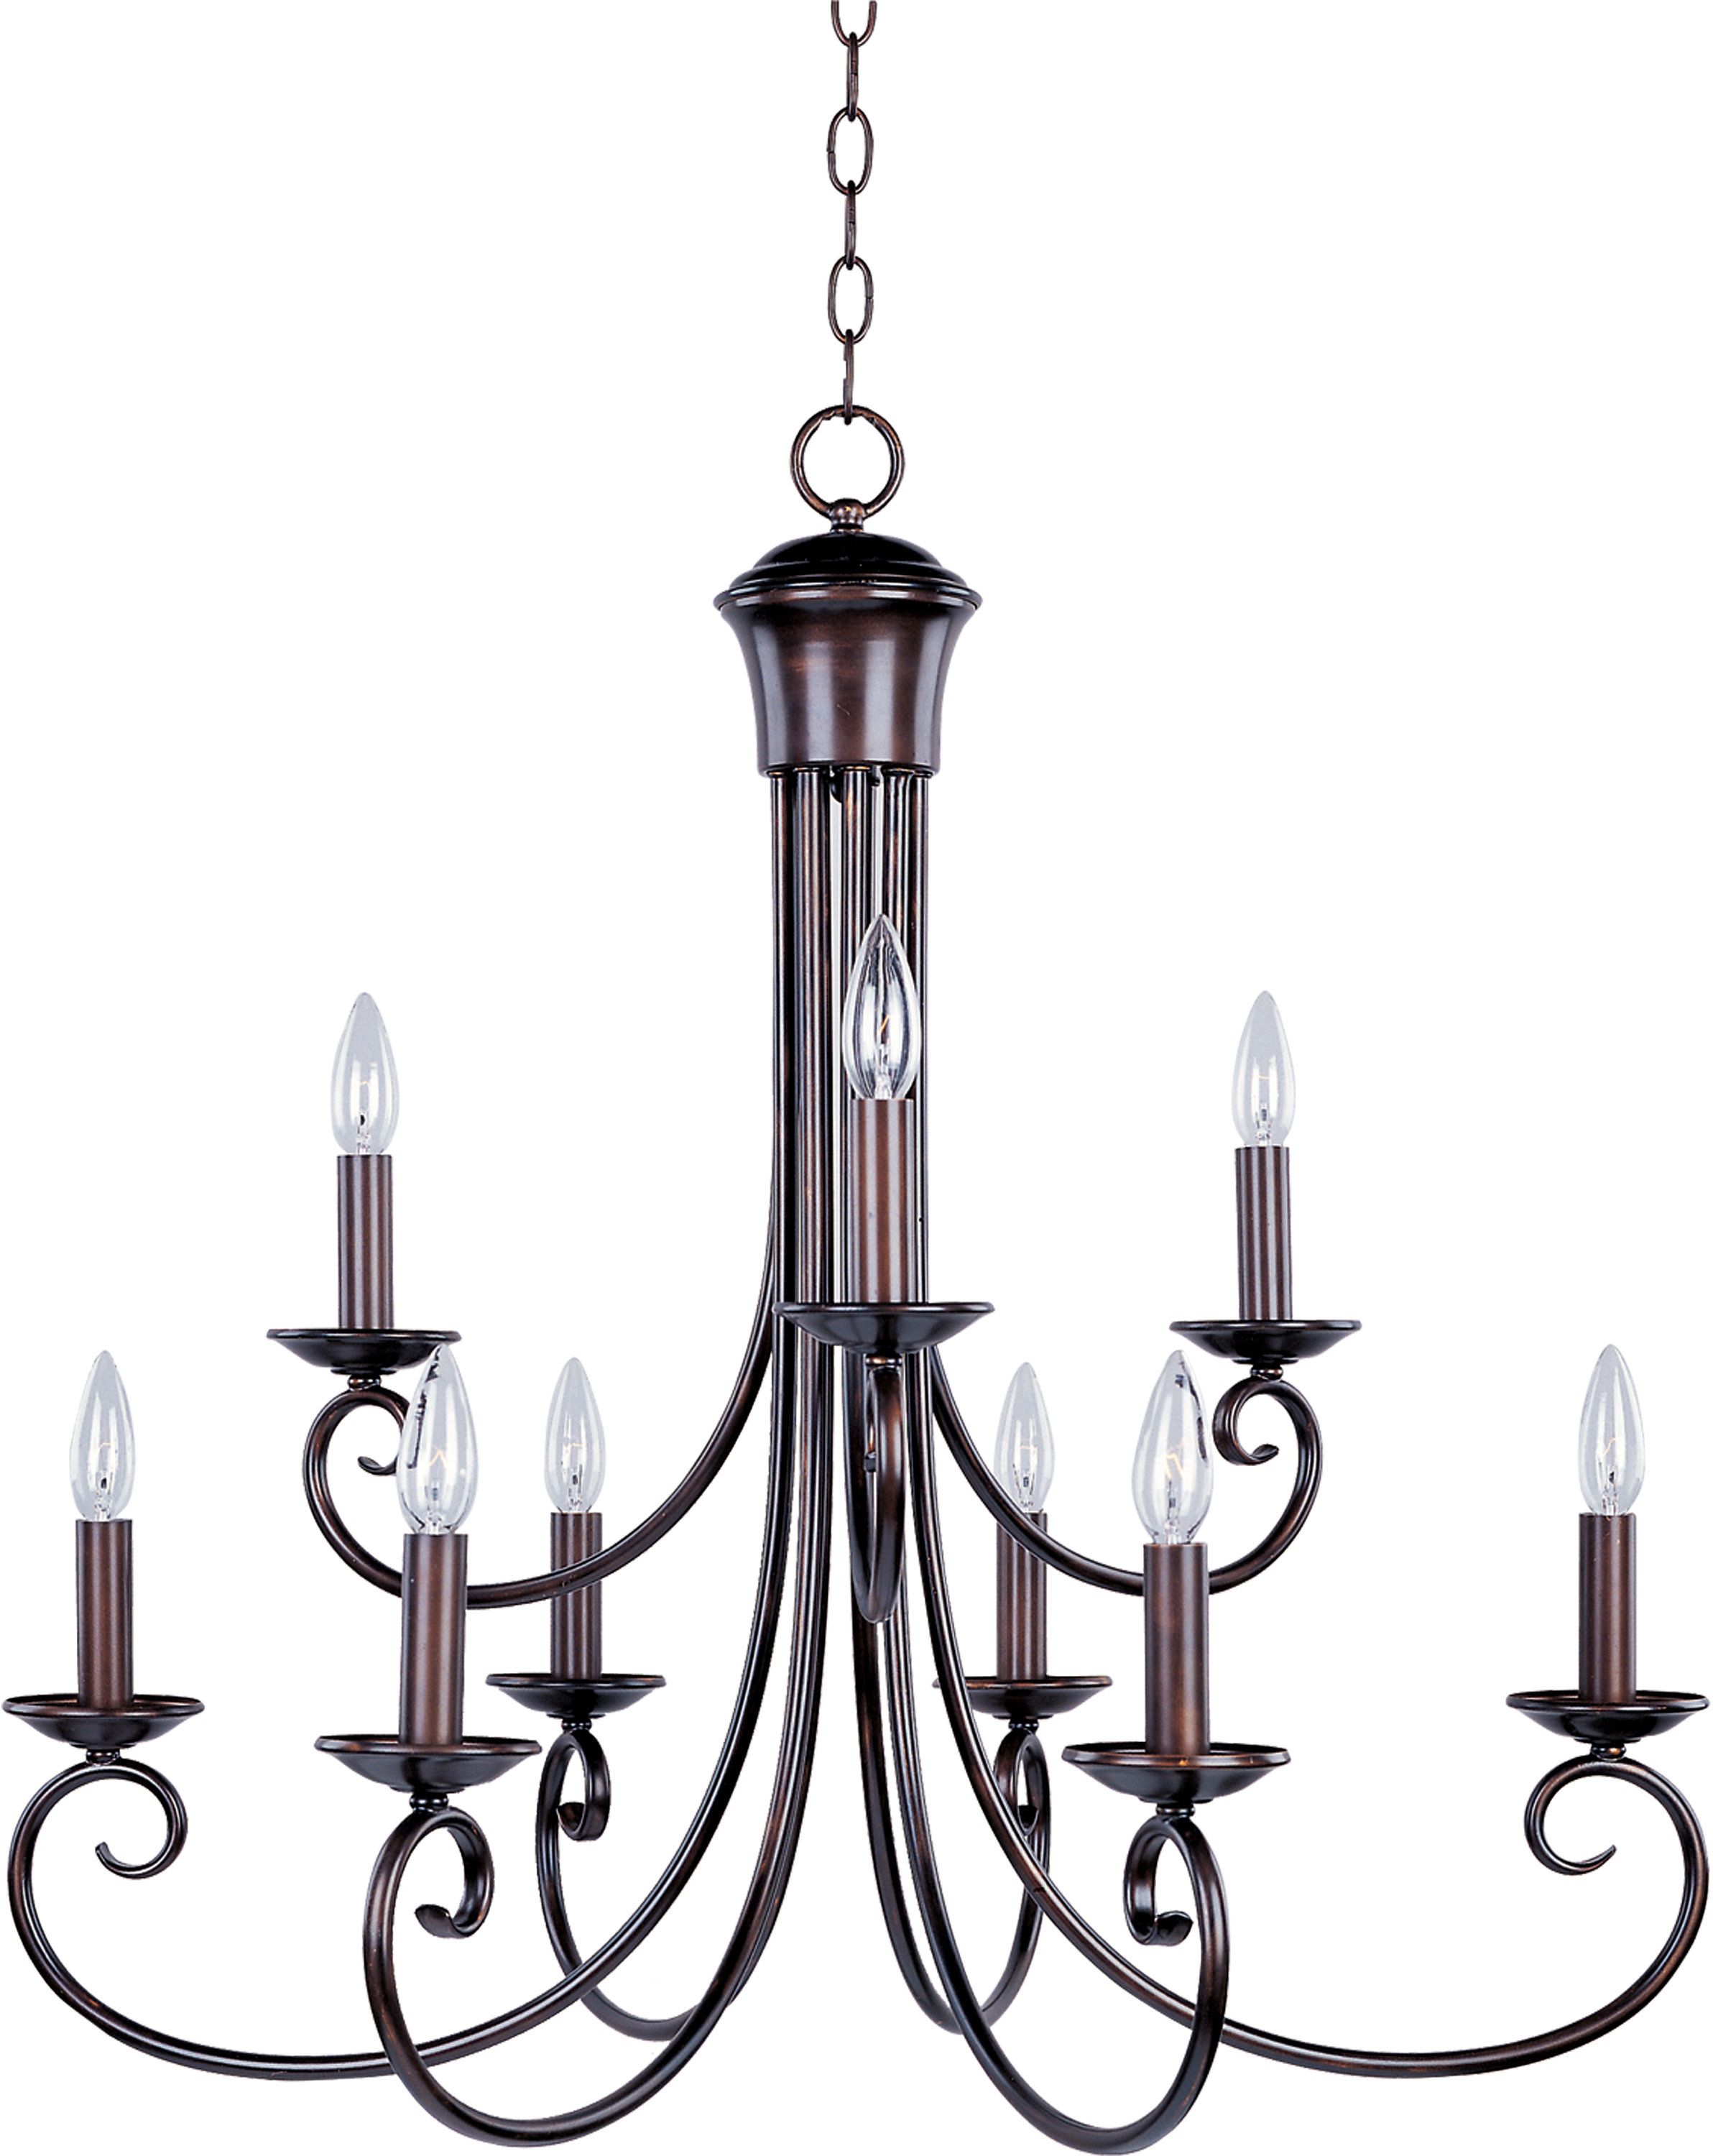 Kenedy 9 Light Candle Style Chandelier With Regard To Giverny 9 Light Candle Style Chandeliers (Photo 2 of 30)